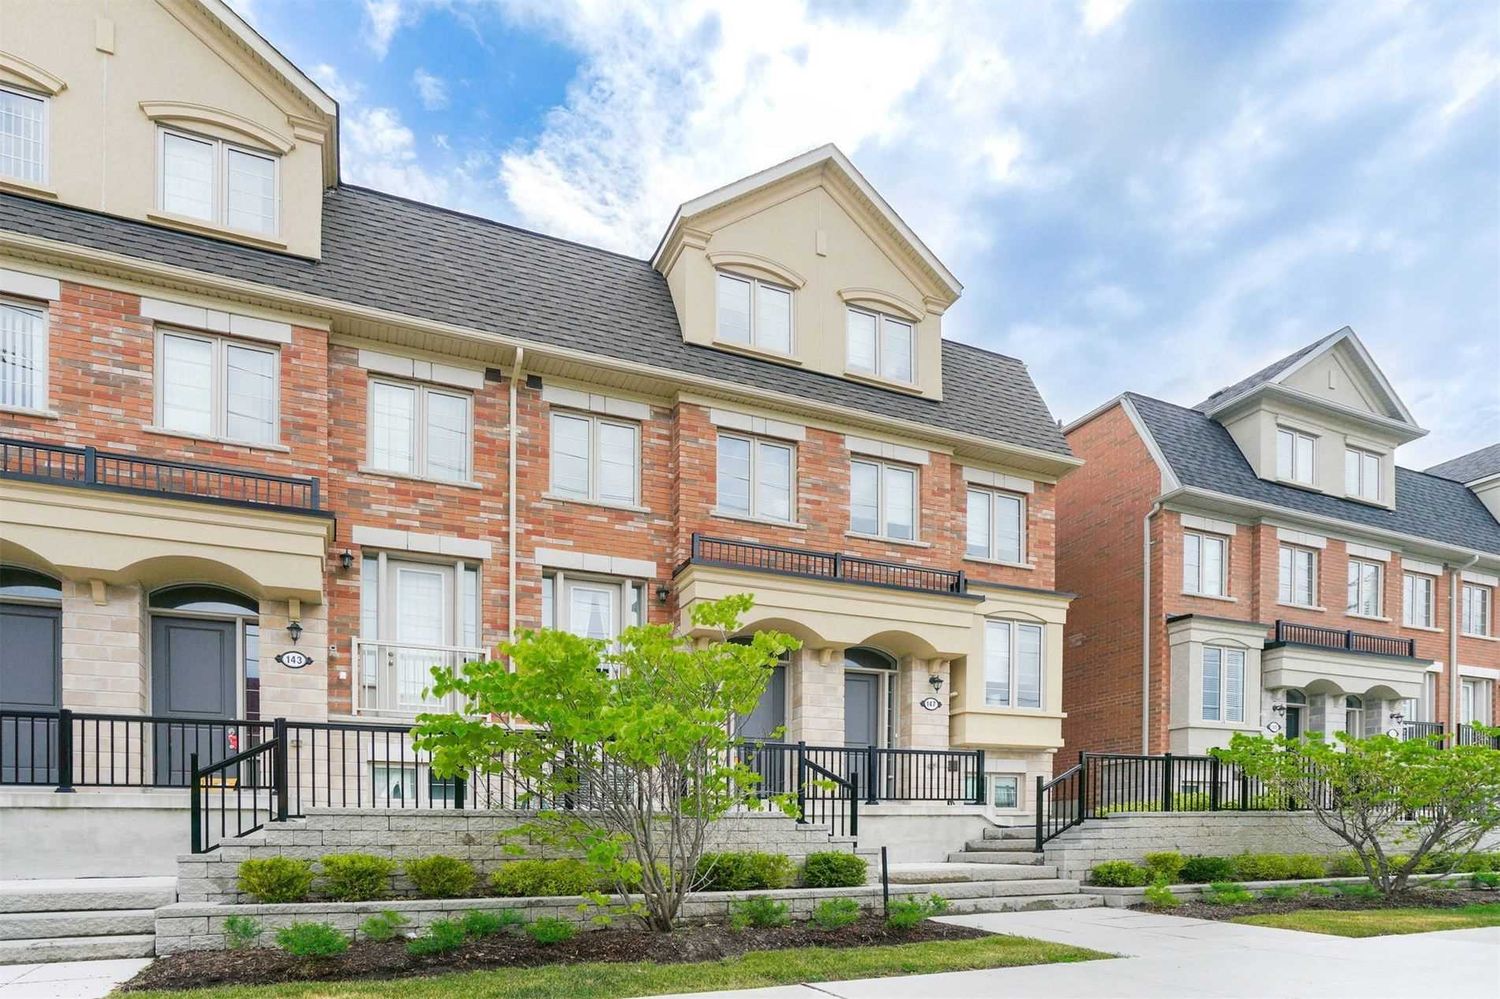 135-193 Norseman Street. Westhaven On Islington Townhomes is located in  Etobicoke, Toronto - image #1 of 3